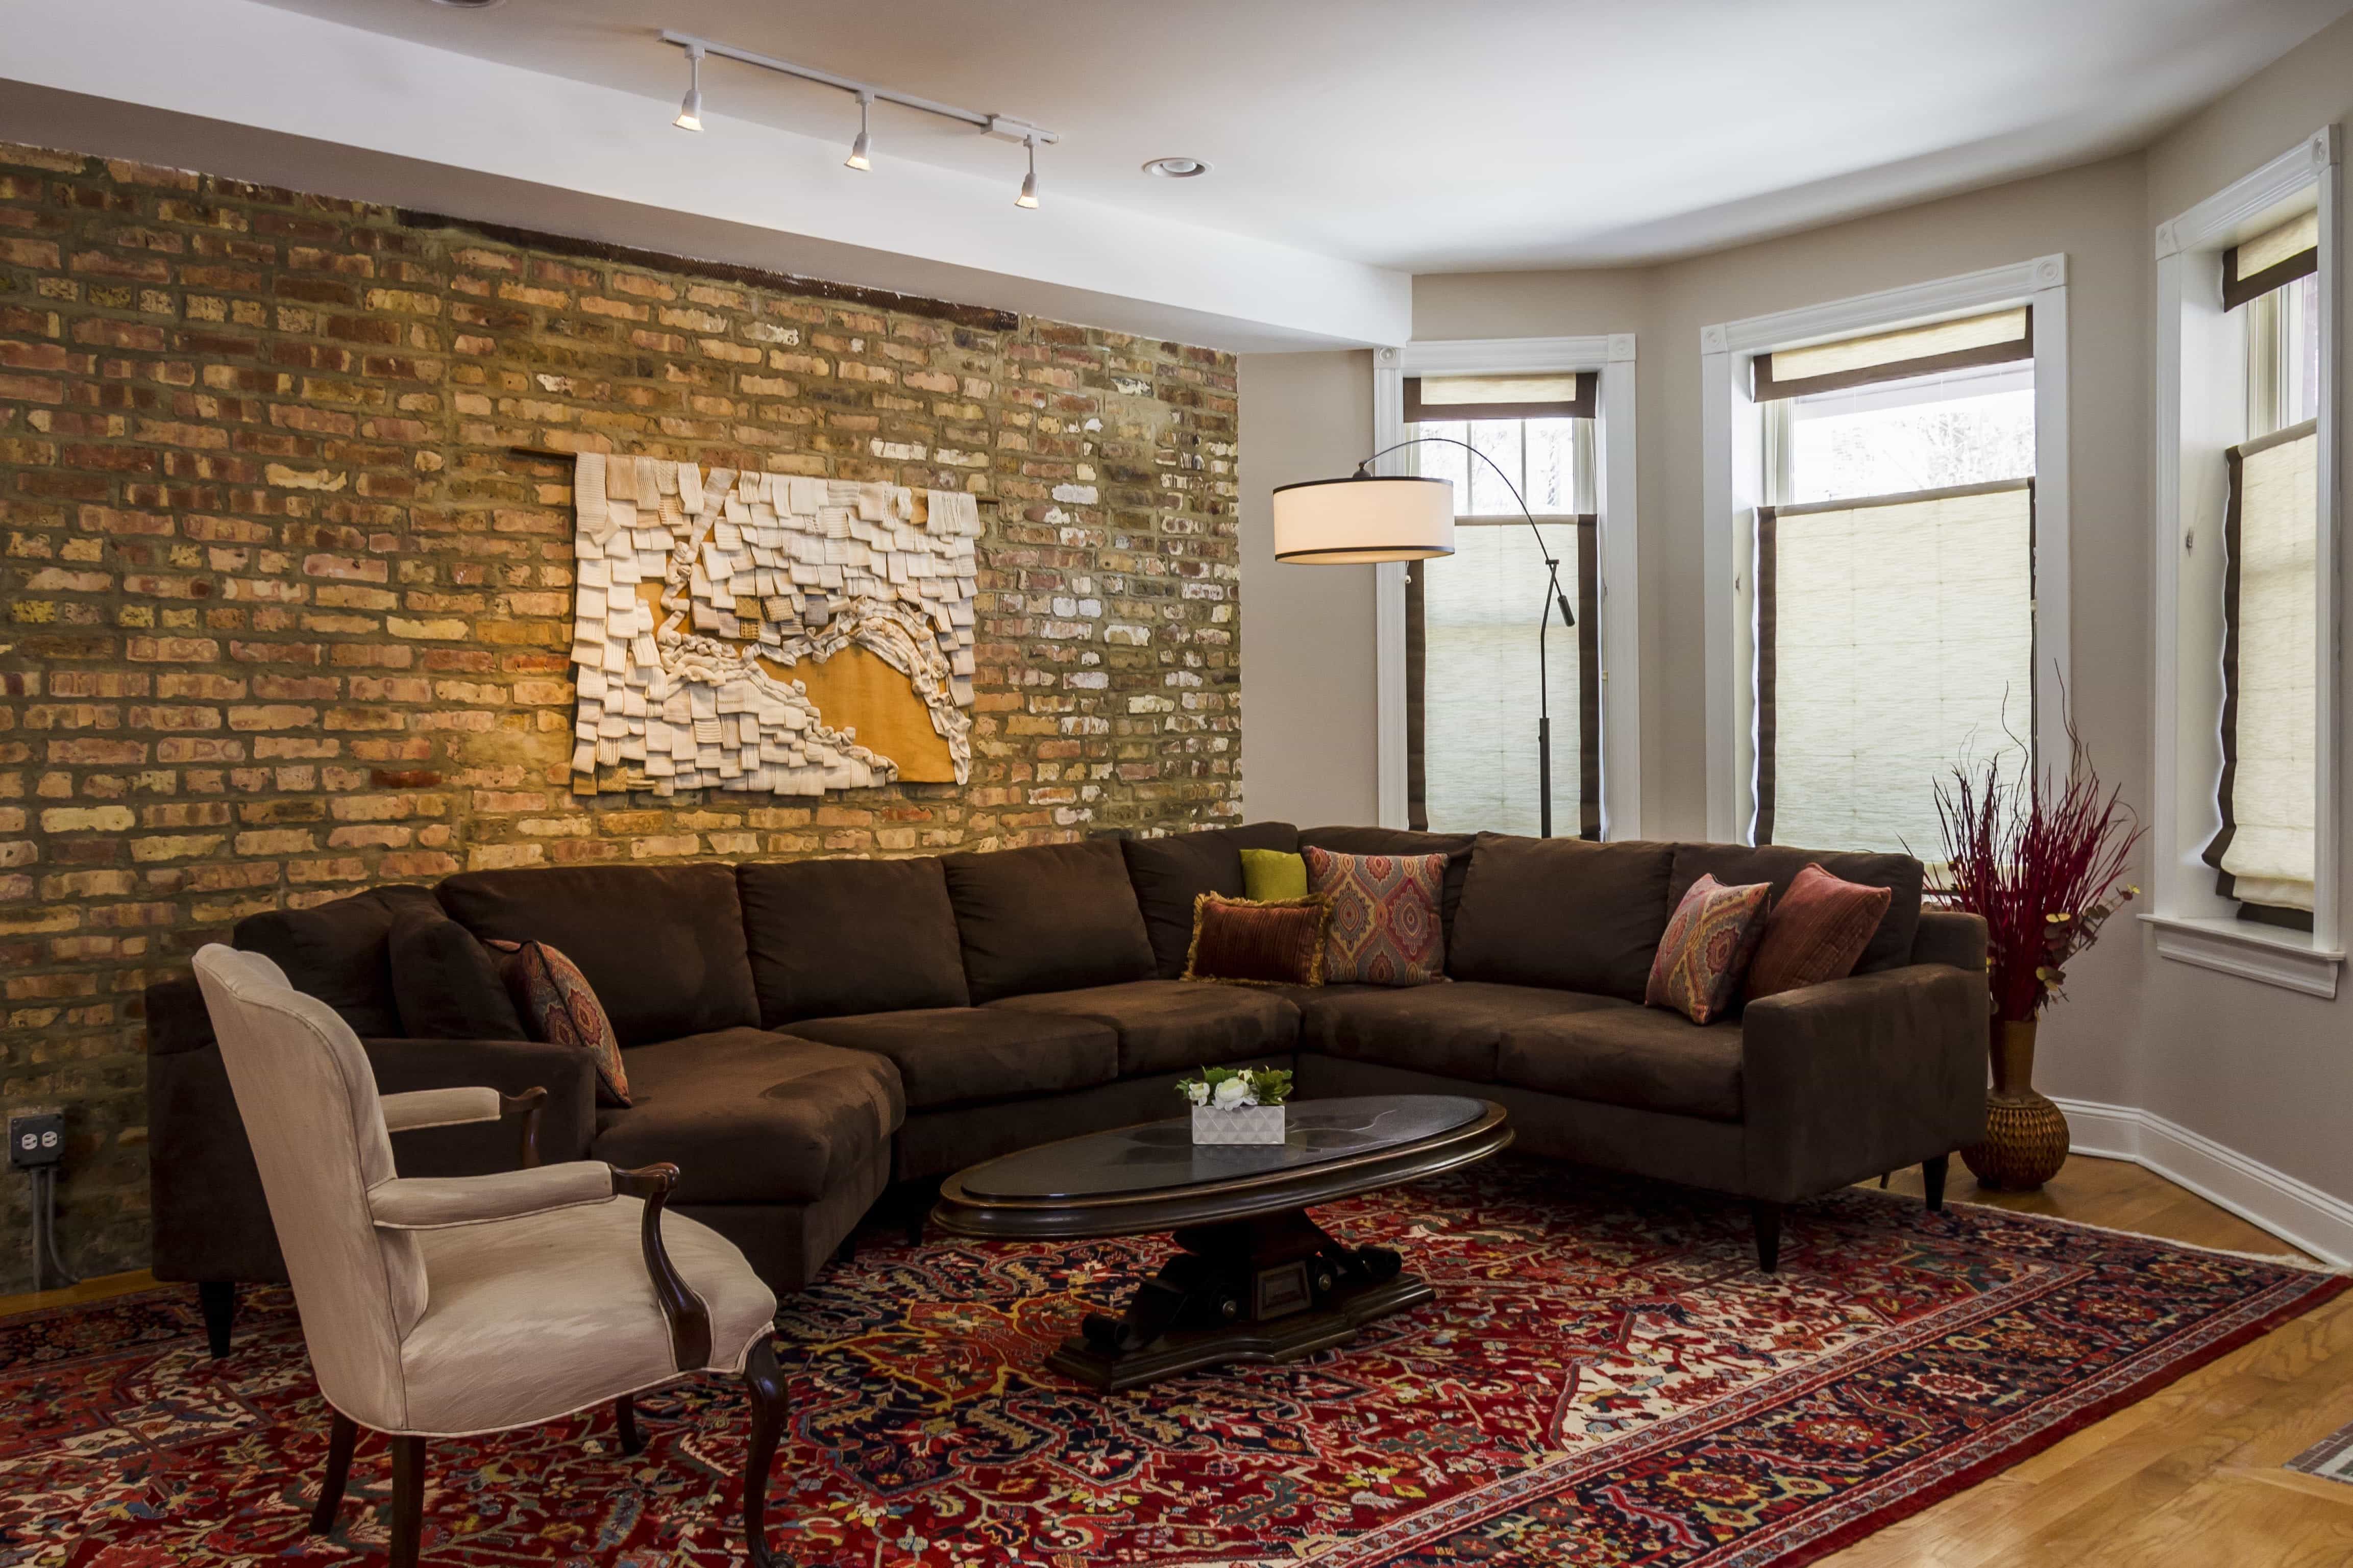 Contemporary Living Room With Brick Wall Feature (View 25 of 30)